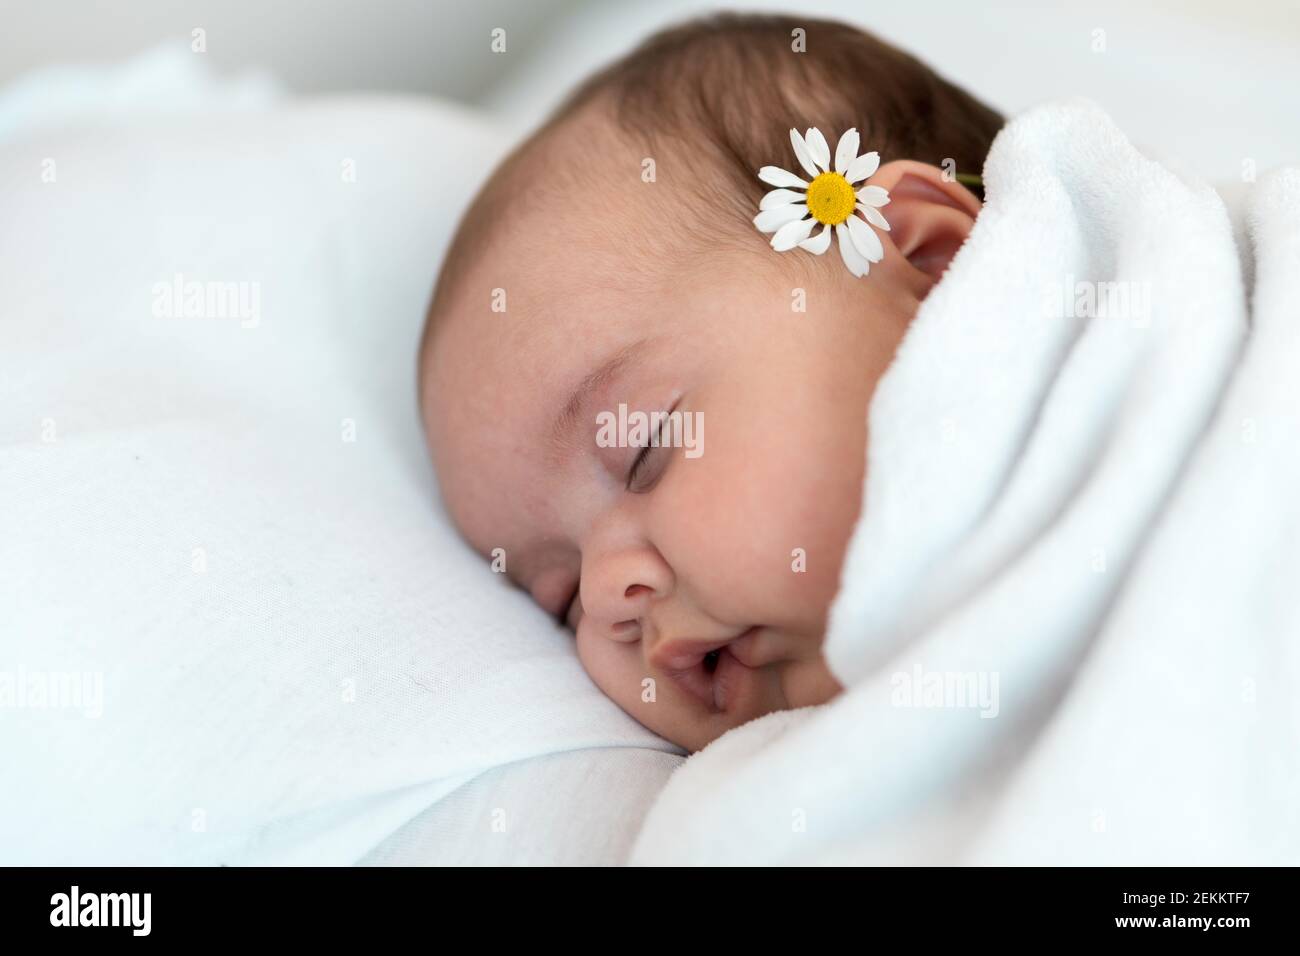 Newborn baby close-up. Side view of a chubby plump infant baby sleeping soundly on his back with chamomile behind the ear on a white background Stock Photo